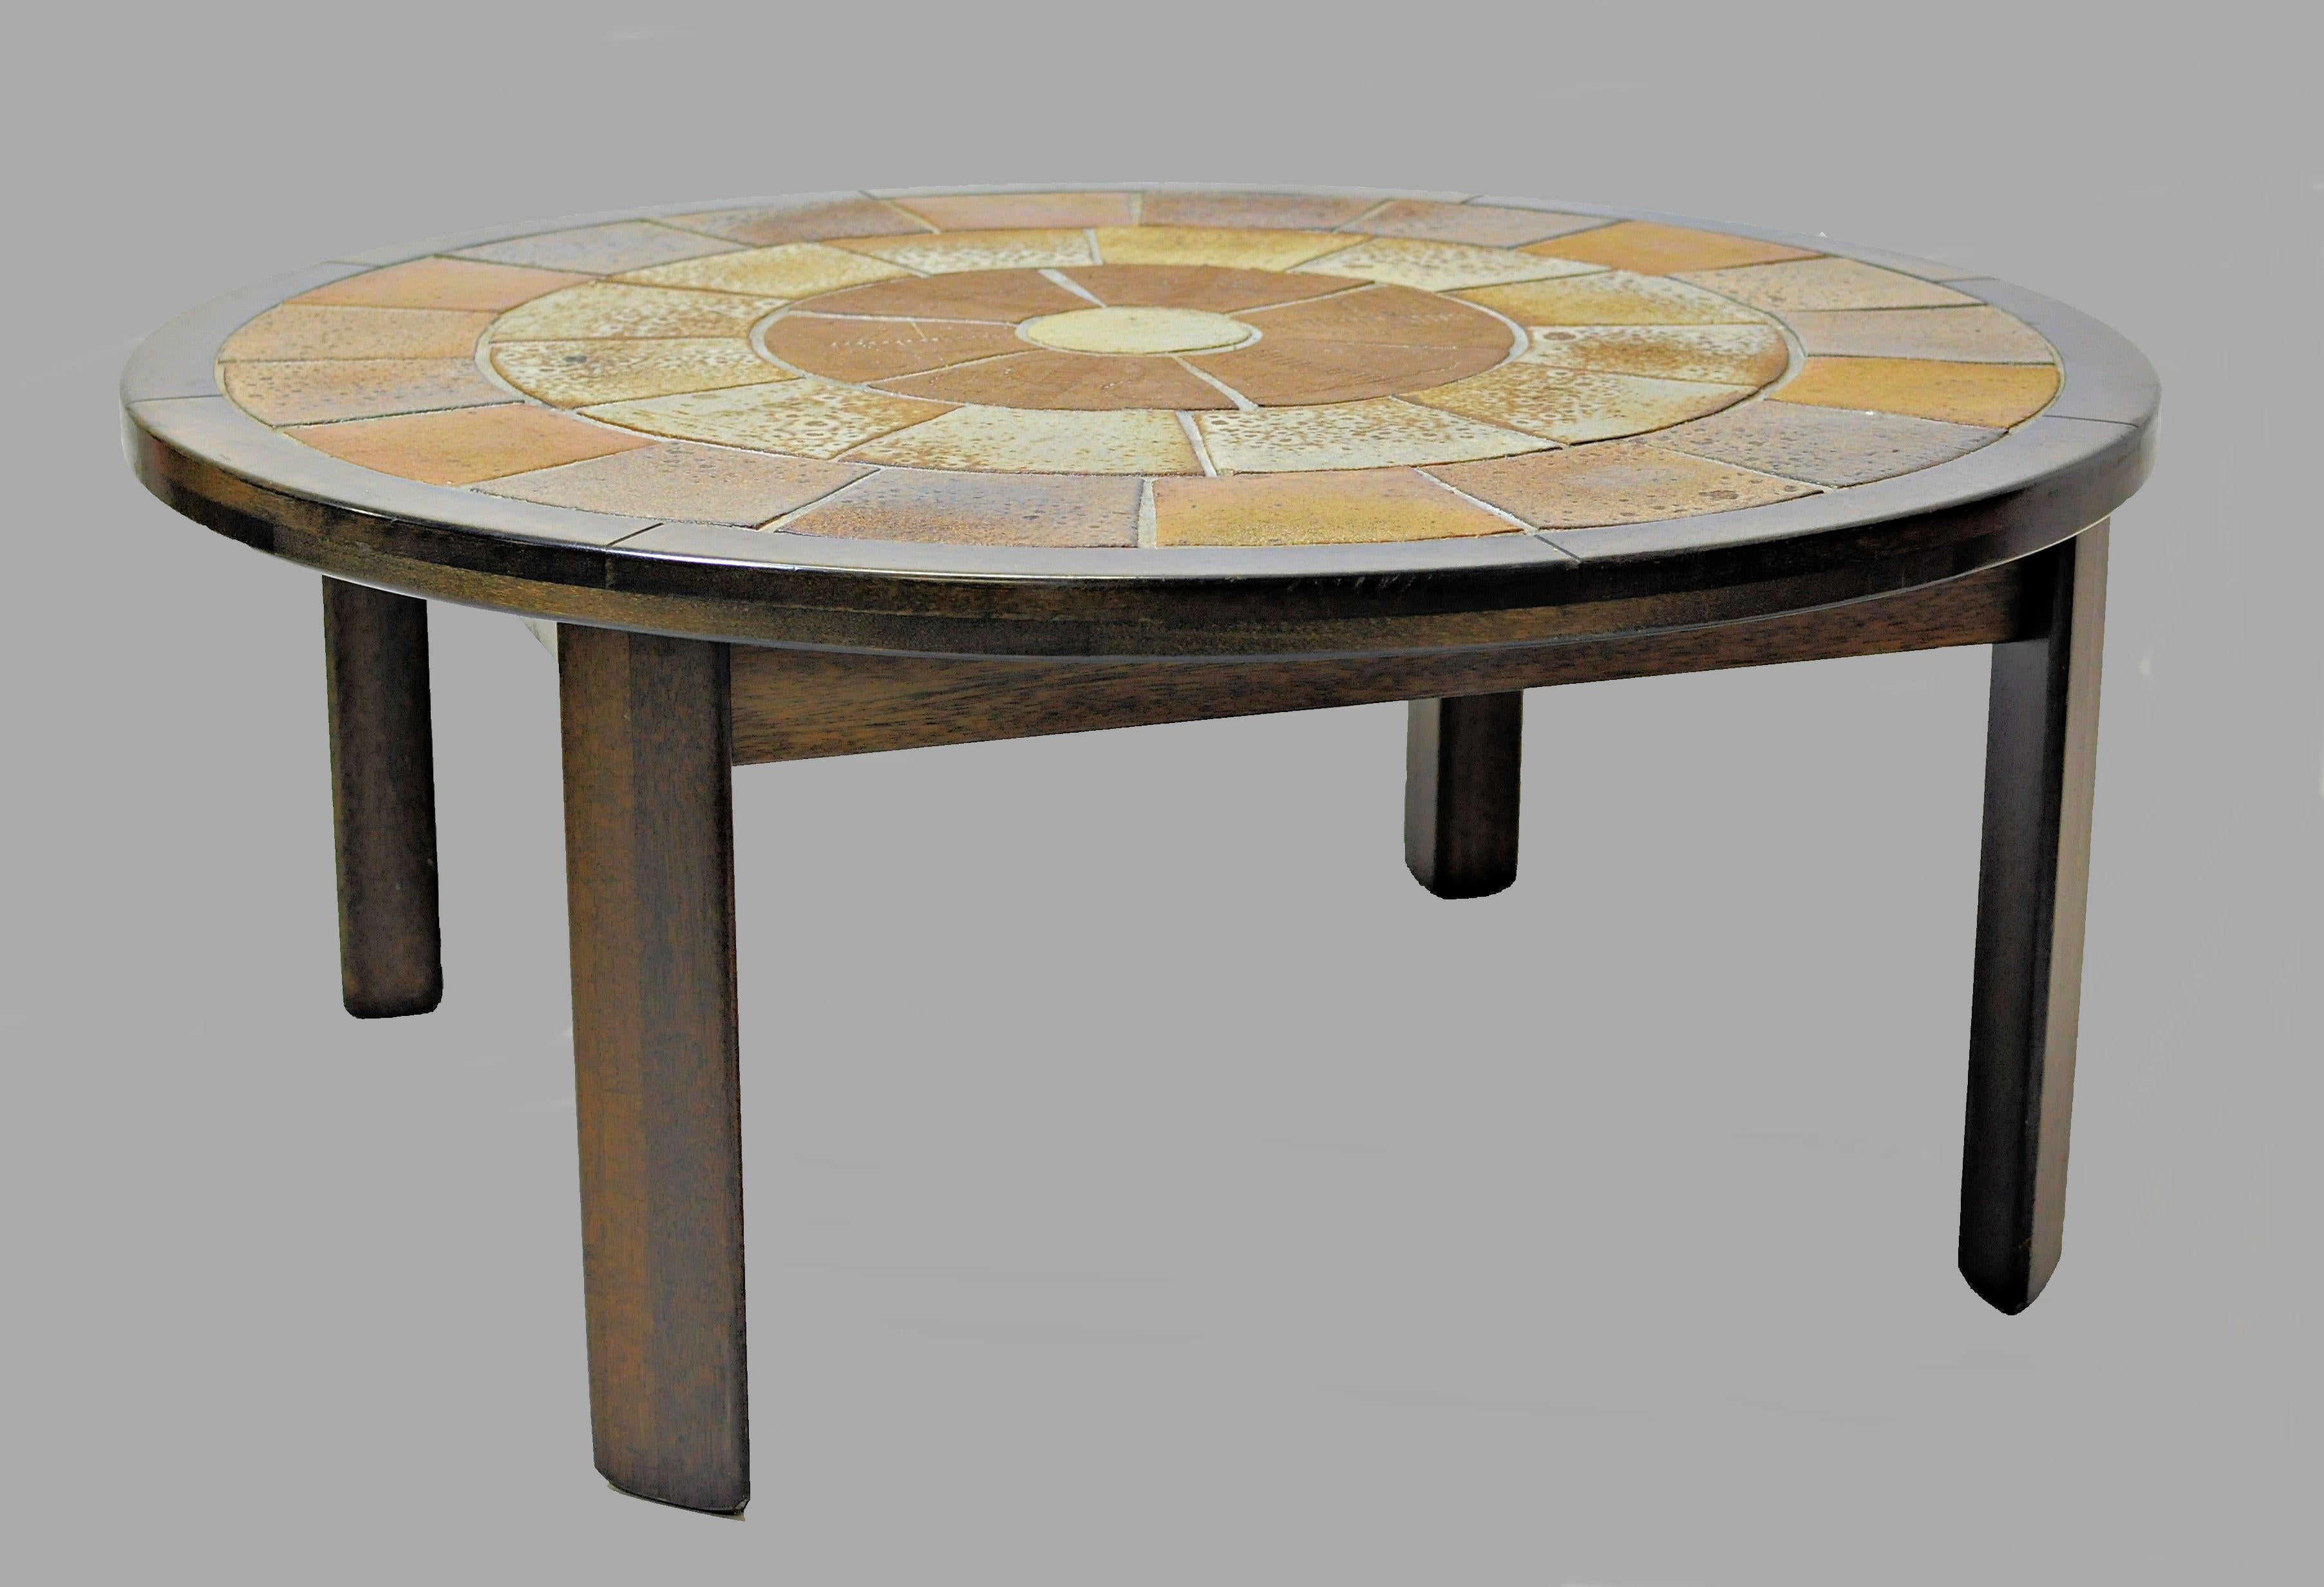 Tue Poulsen tile topped coffee table in tanned oak signed by Tue Poulsen.

The coffee table has been checked and refinished by cabinetmaker and is in very good condition.

We are shipping our pieces to most of the world on regular basis at